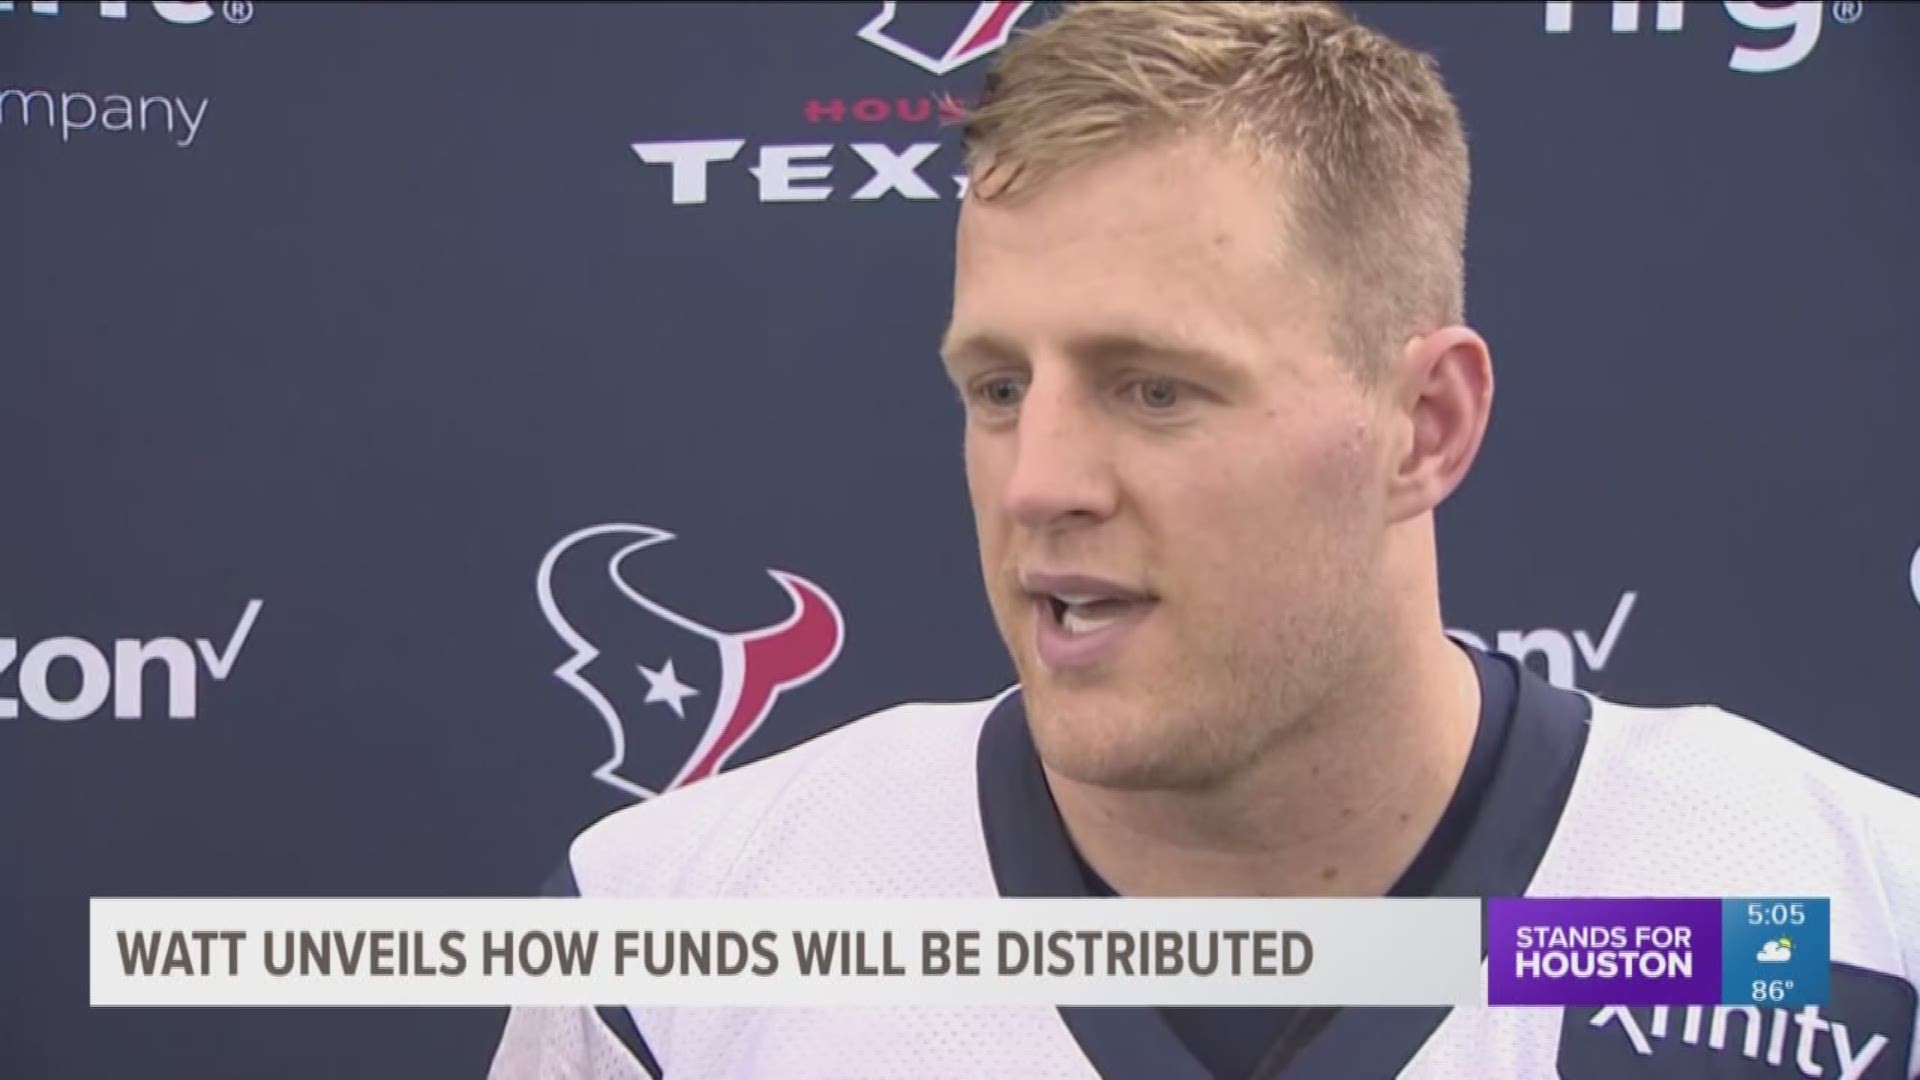 Houston Texans star J.J. Watt gave a report on where money for Harvey recovery is going a year after the storm hit Houston.